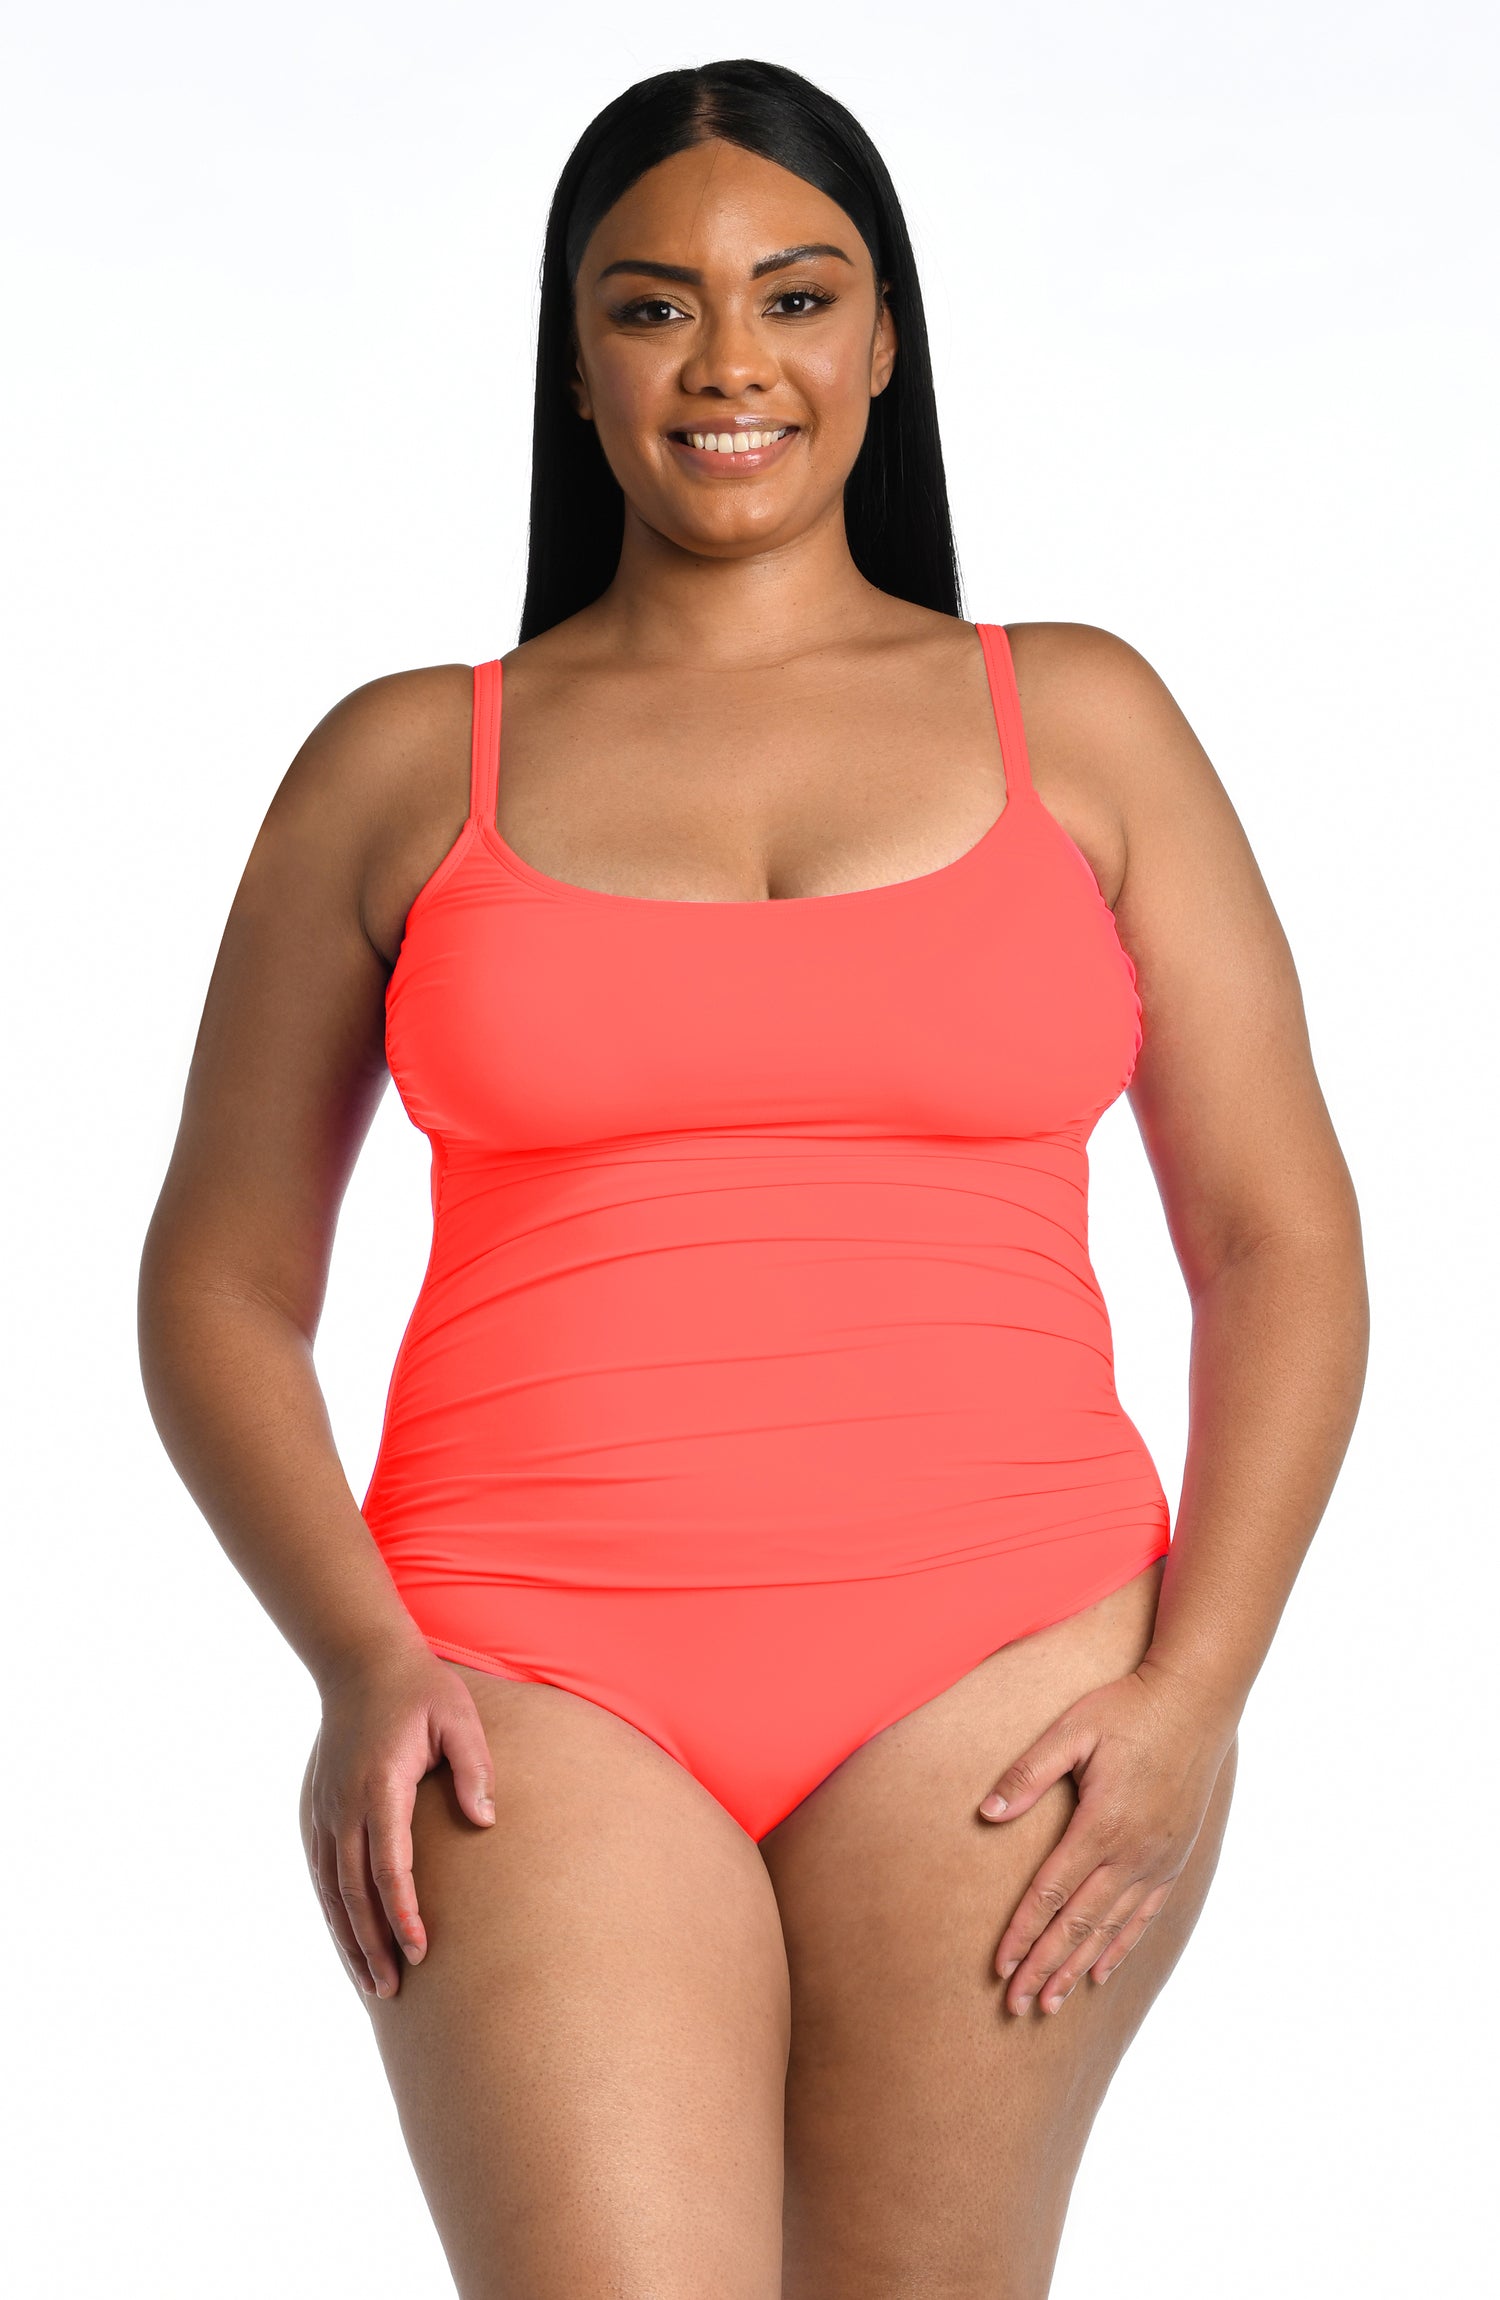 Coral-red one-piece swimsuit